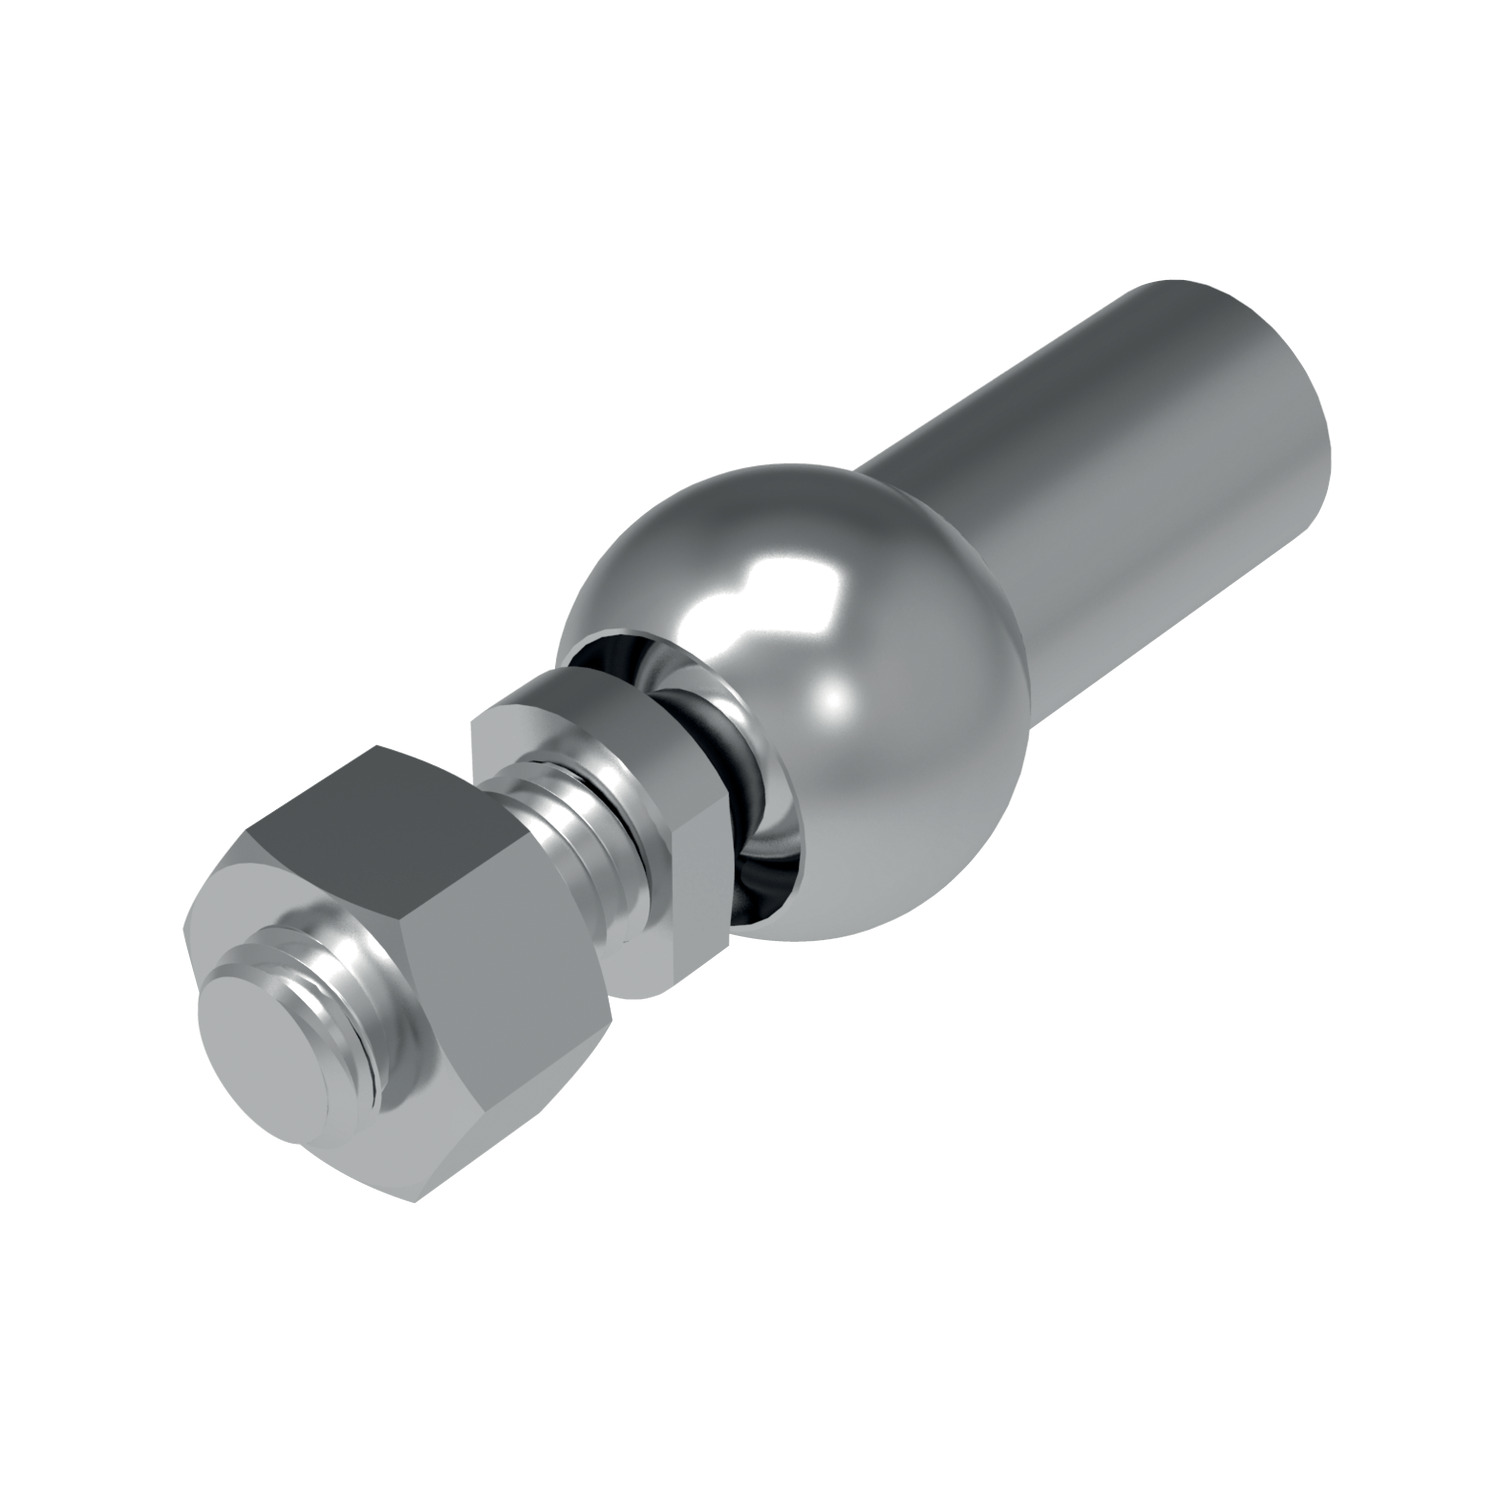 Product 65524, Stainless Axial Ball and Socket Joints  / 